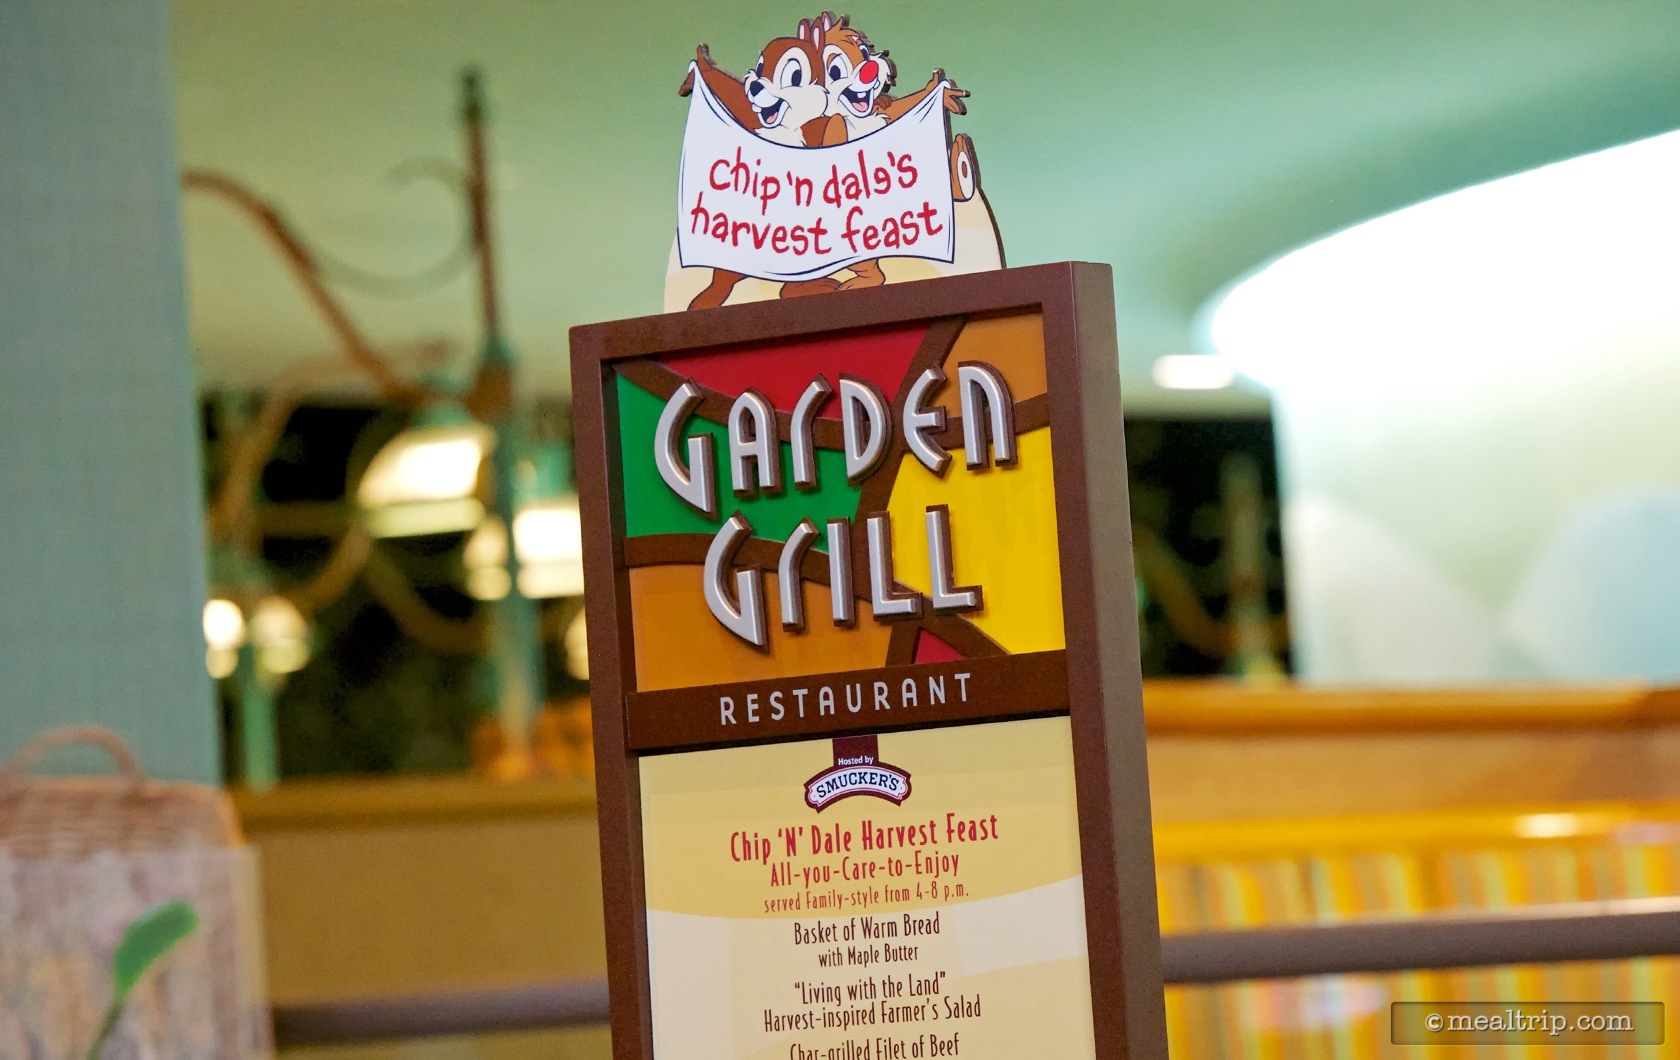 The Land's Garden Grill Restaurant Now Offers Breakfast and Lunch Reservation Options